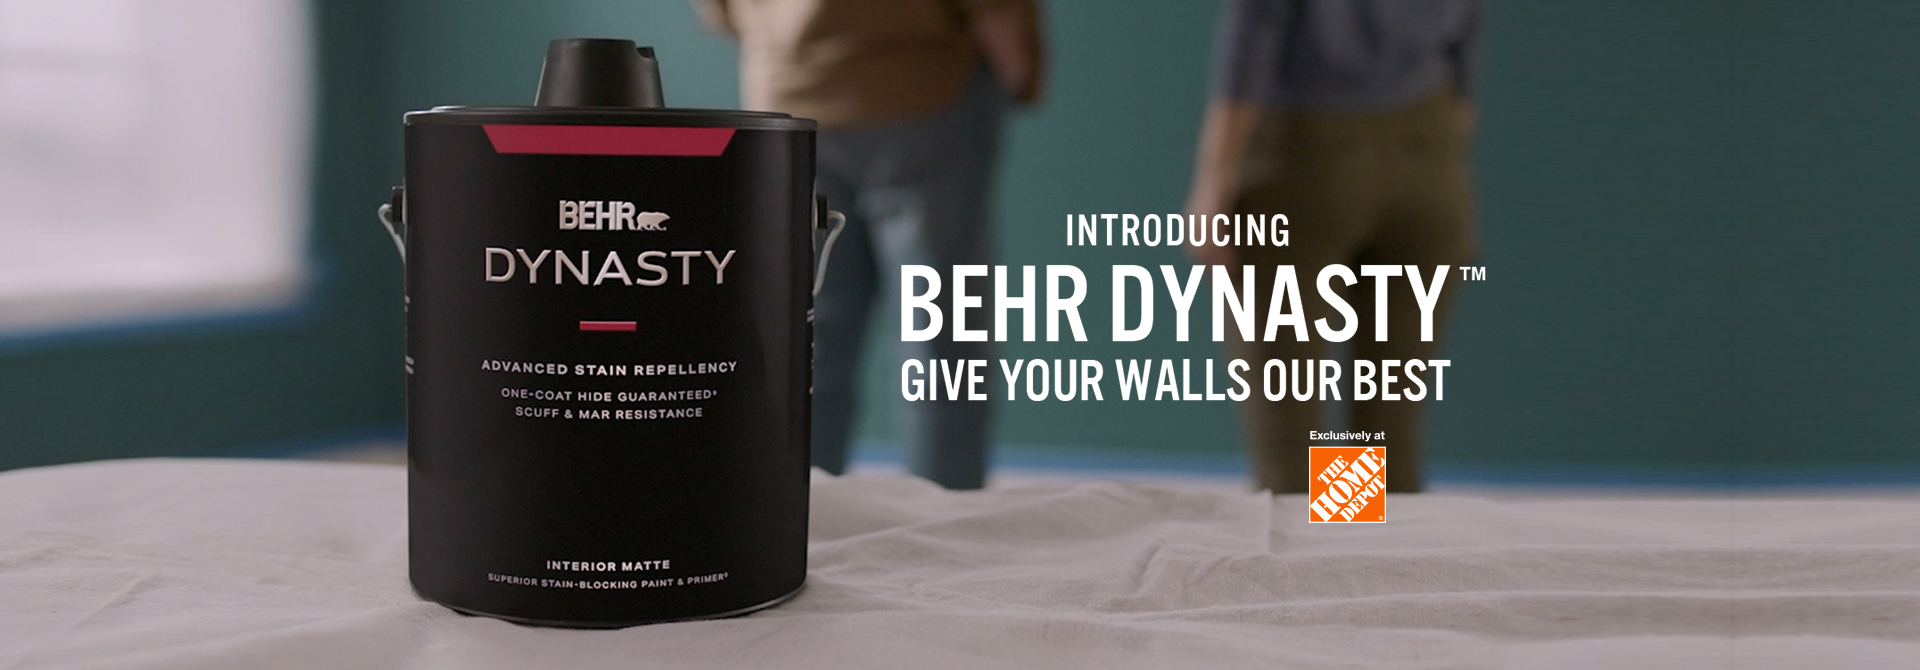 Couple getting ready to paint with a can of BEHR DYNASTY Flat interior paint and the words Introducing BEHR DYNASTY Give Your Walls Our Best in foreground.